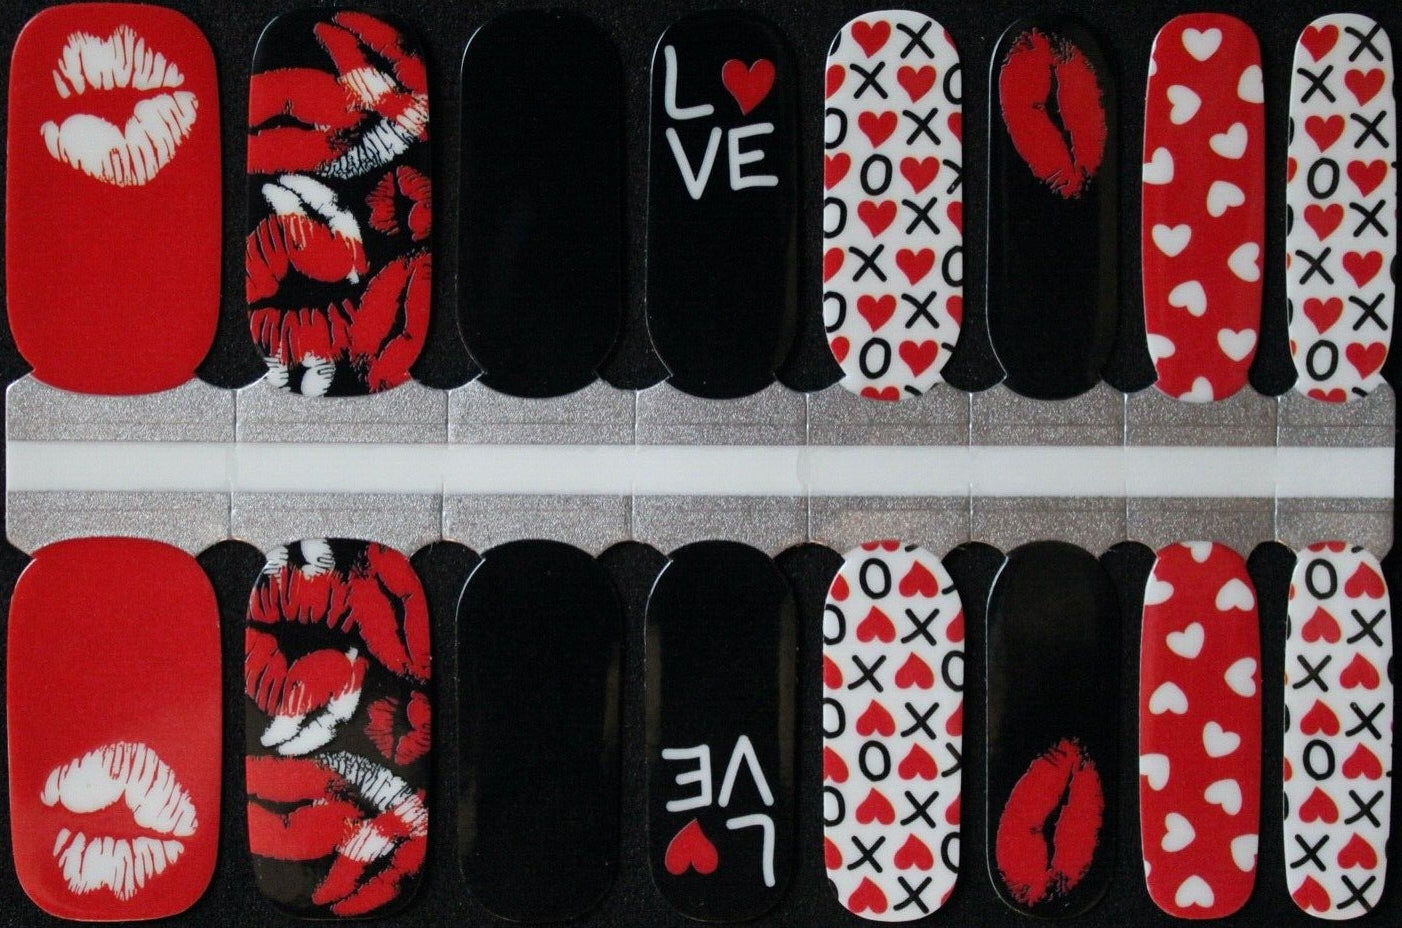 Black red and white lipstick kisses love and hearts nail polish wraps strips stickers